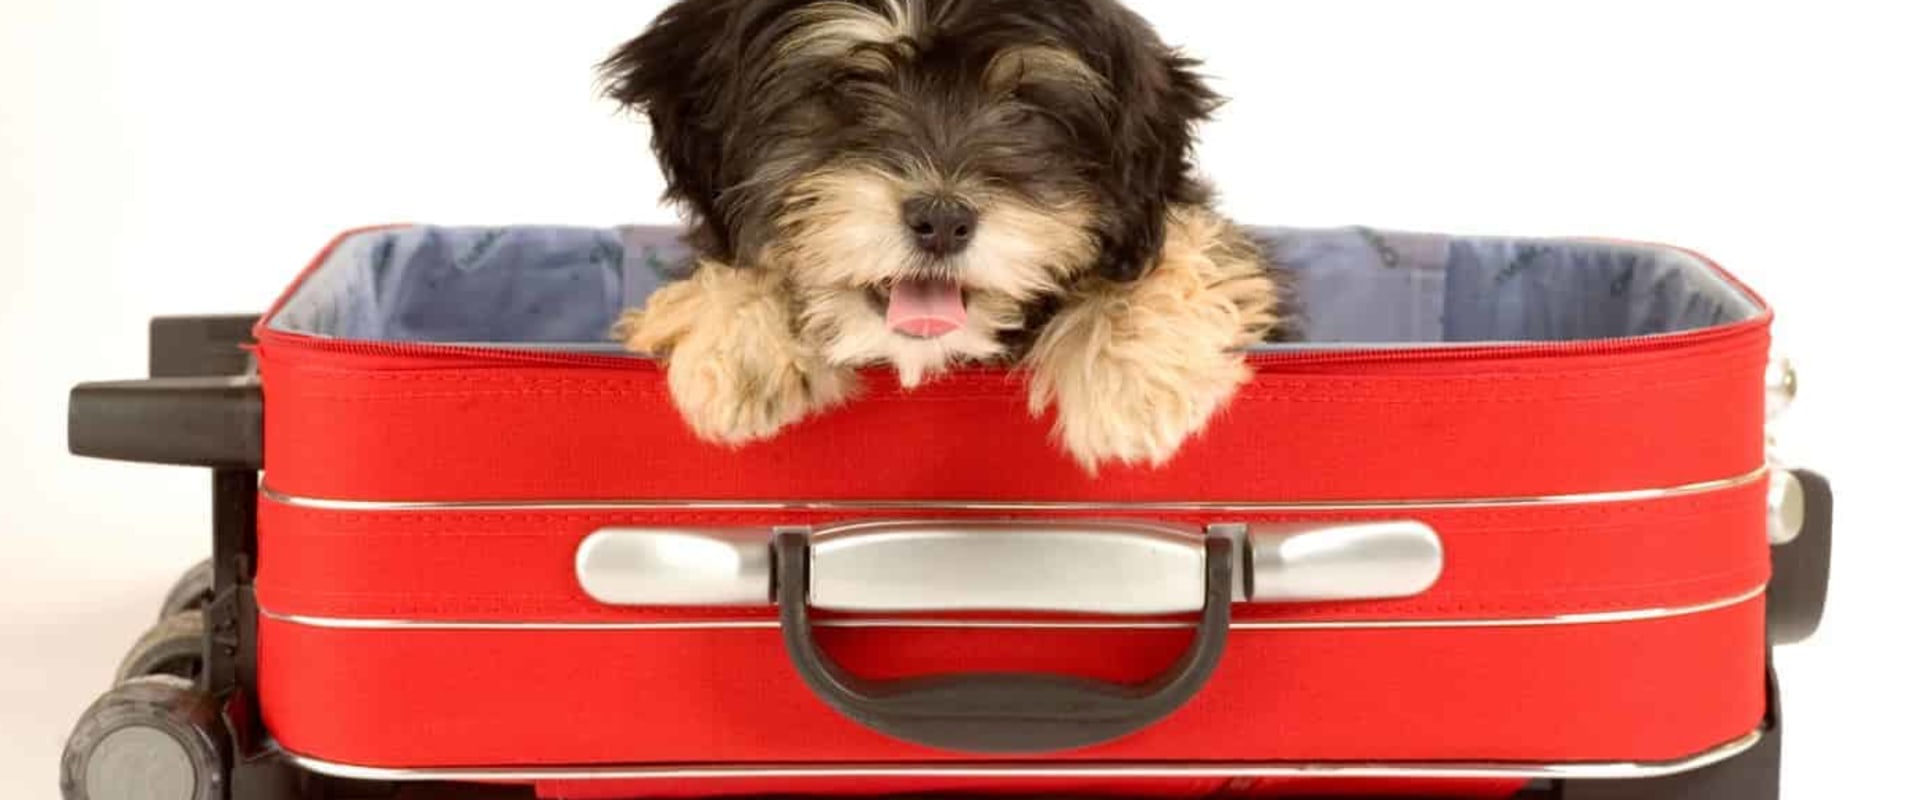 Making Travel Arrangements for Families and Pets